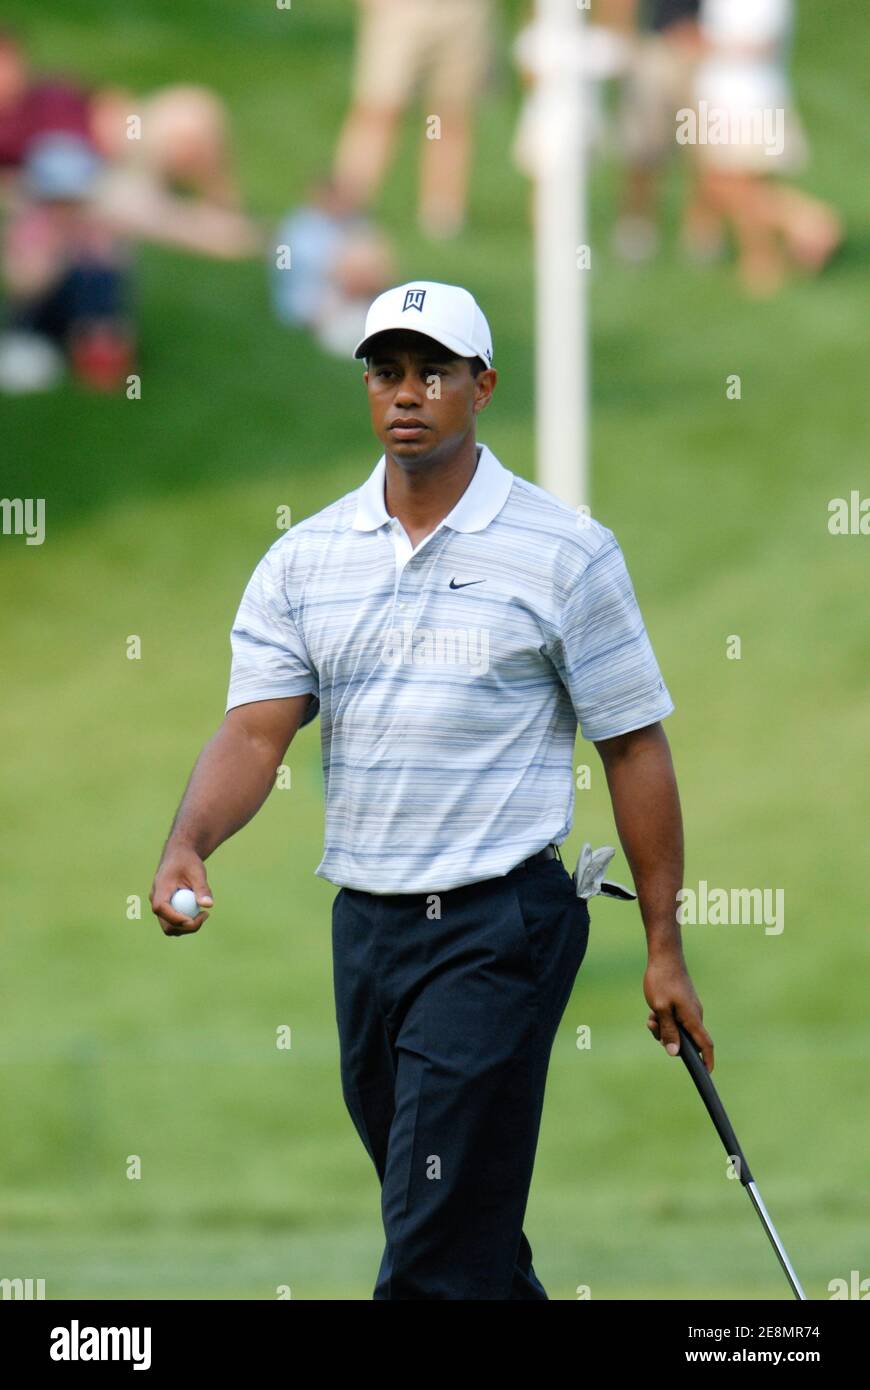 Tiger Woods walks off the tenth green at the Earl Woods Memorial Pro-Am, in Potomac, MD, USA on July 4, 2007. Photo by John C. Middlebrook/Cal Sport Media/Cameleon/ABACAPRESS.COM Stock Photo